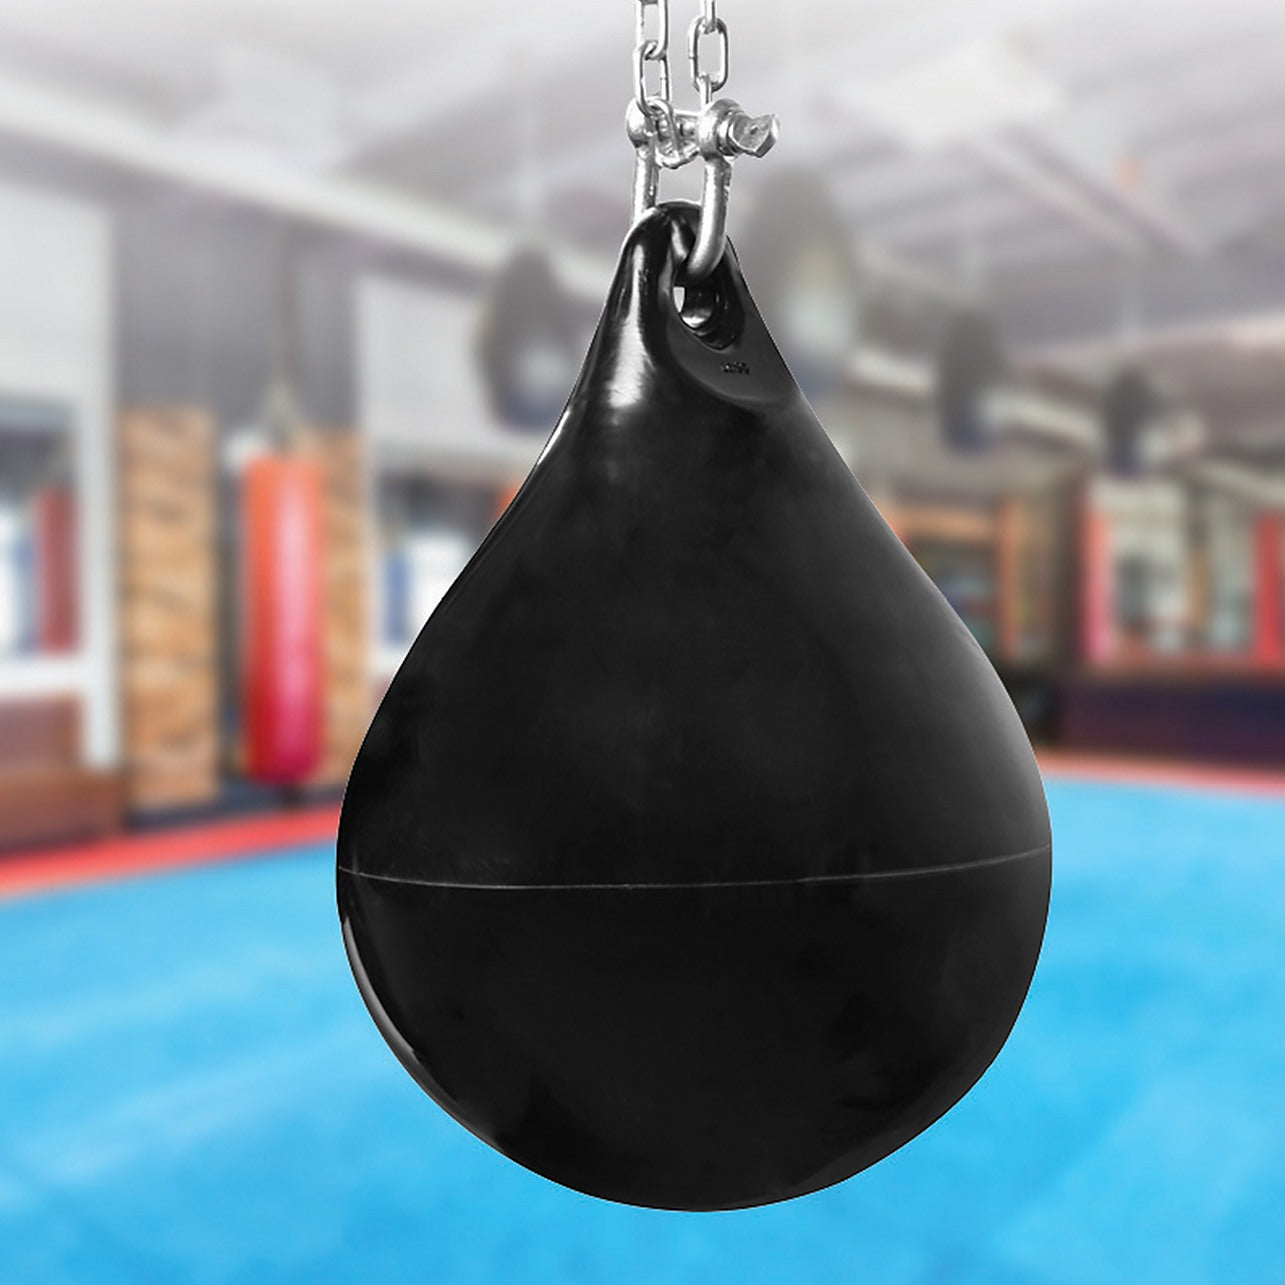 Boxing Heavy Bag Workout: What Is It, and Why Is It So Important?